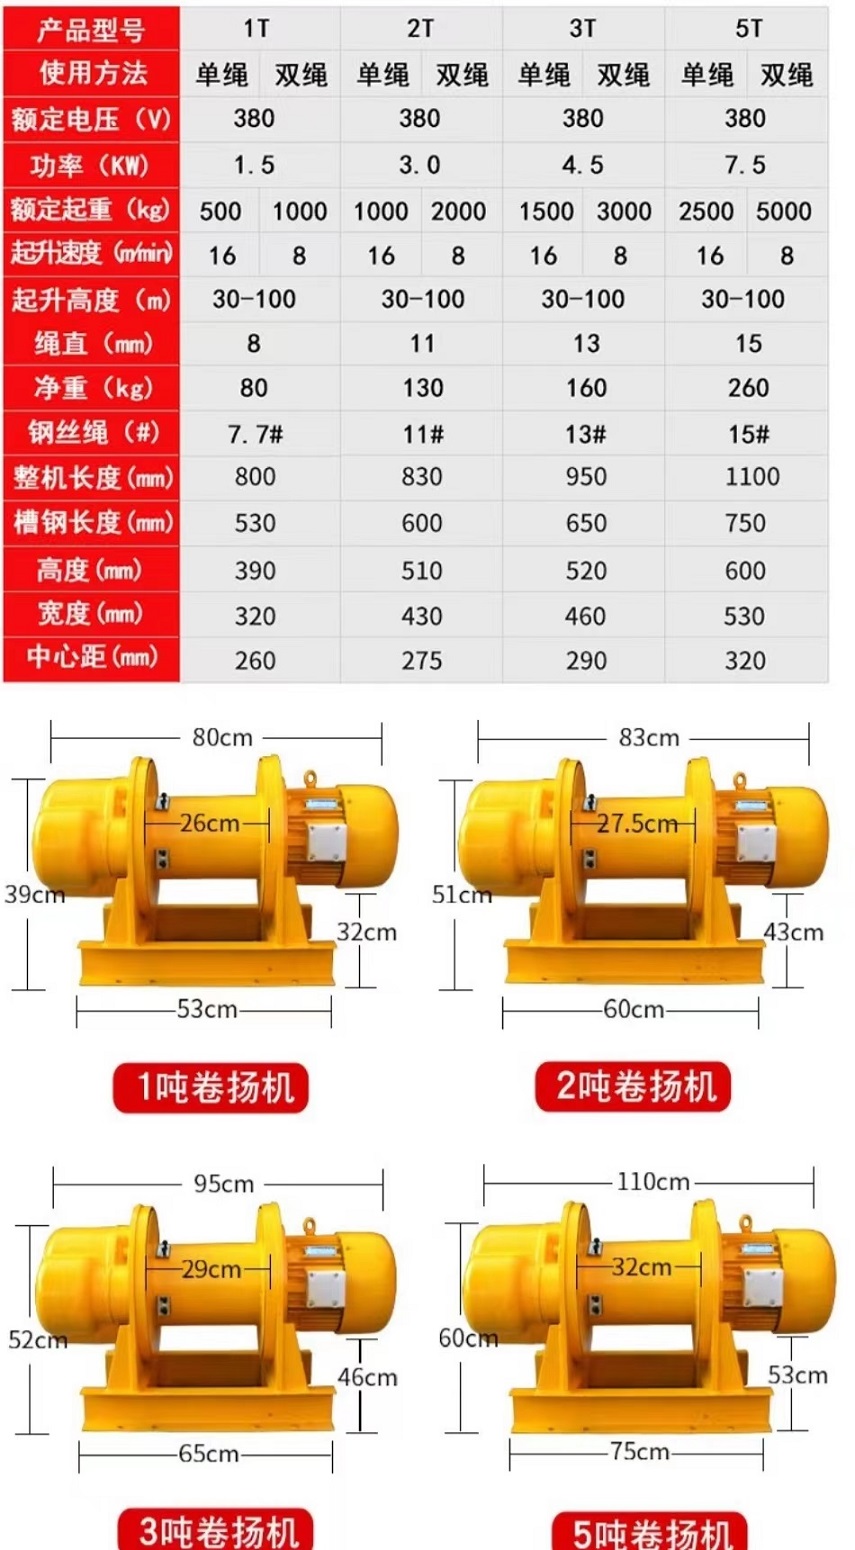 Technical details of electric winch.jpg